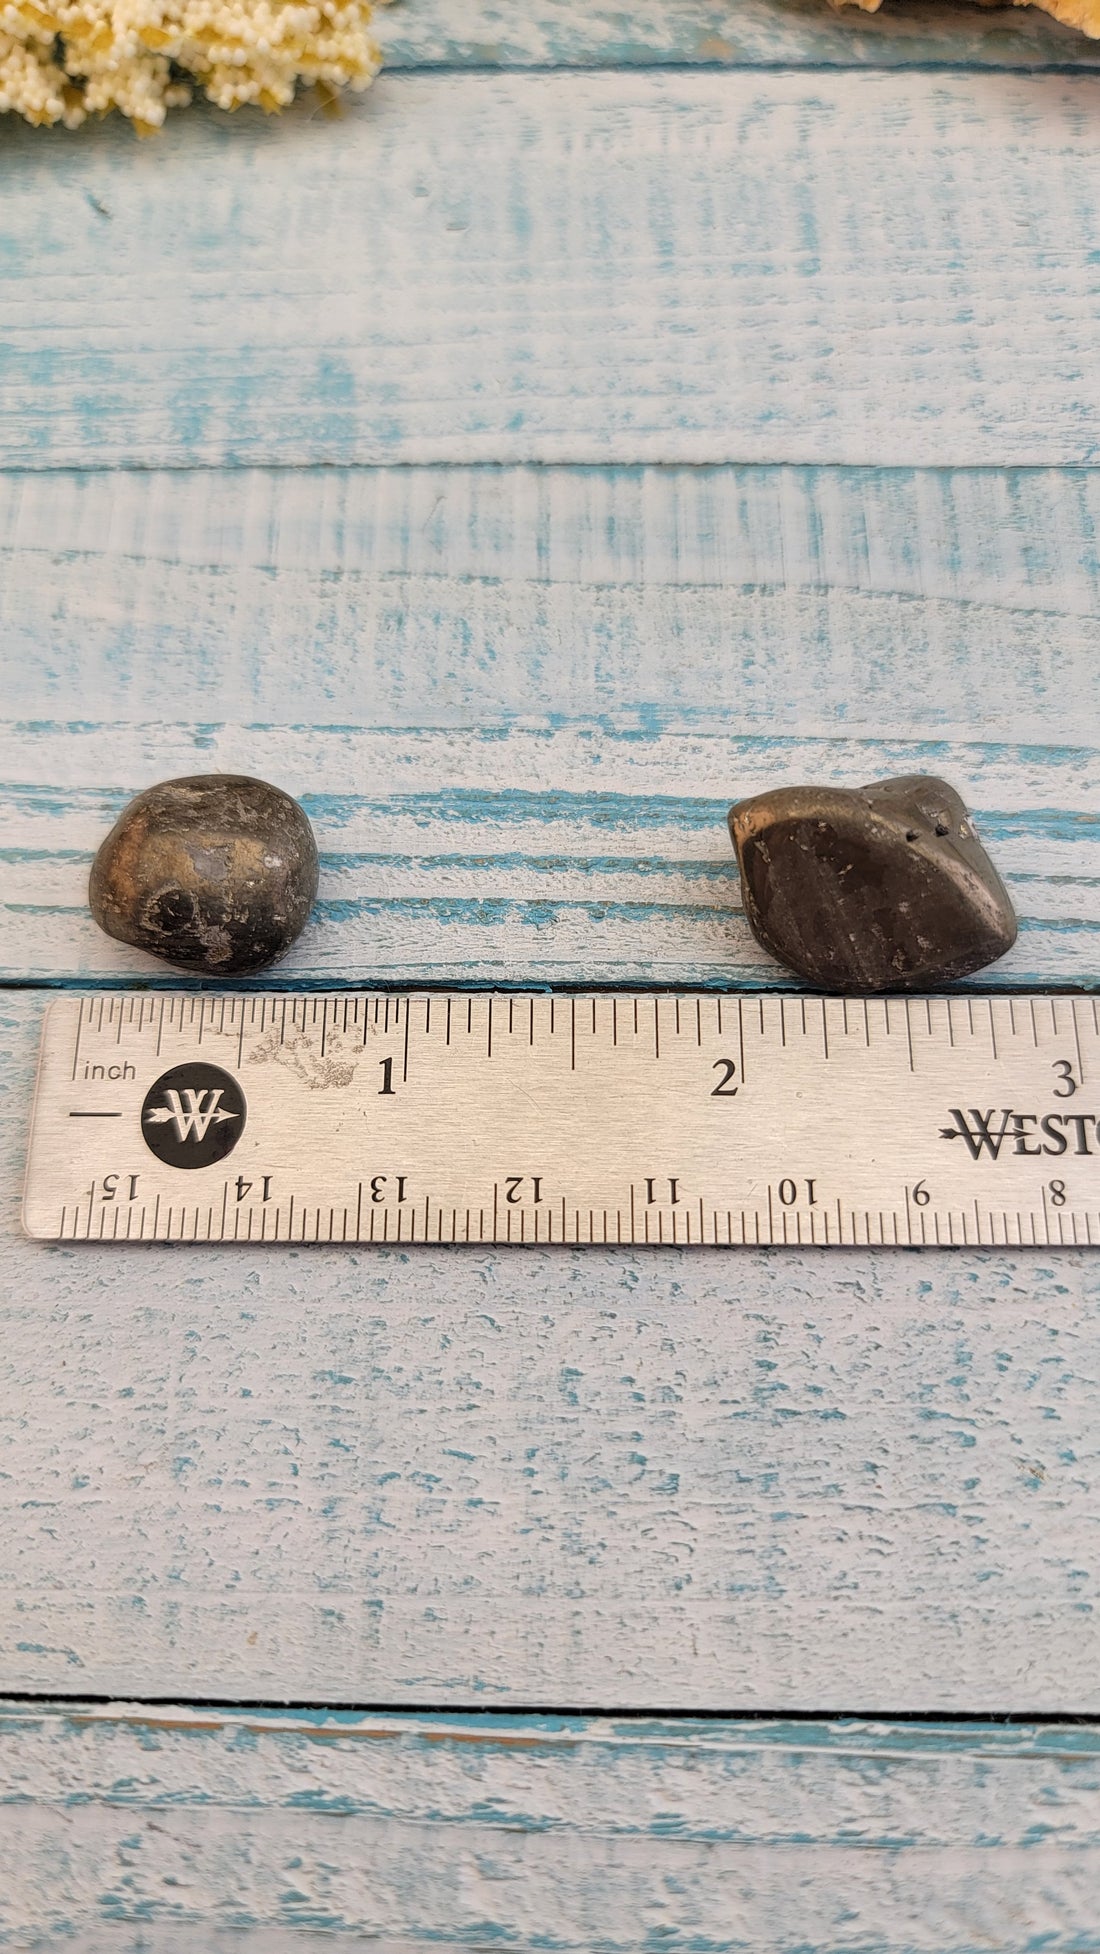 ruler comparing sizes of tumbled pyrite